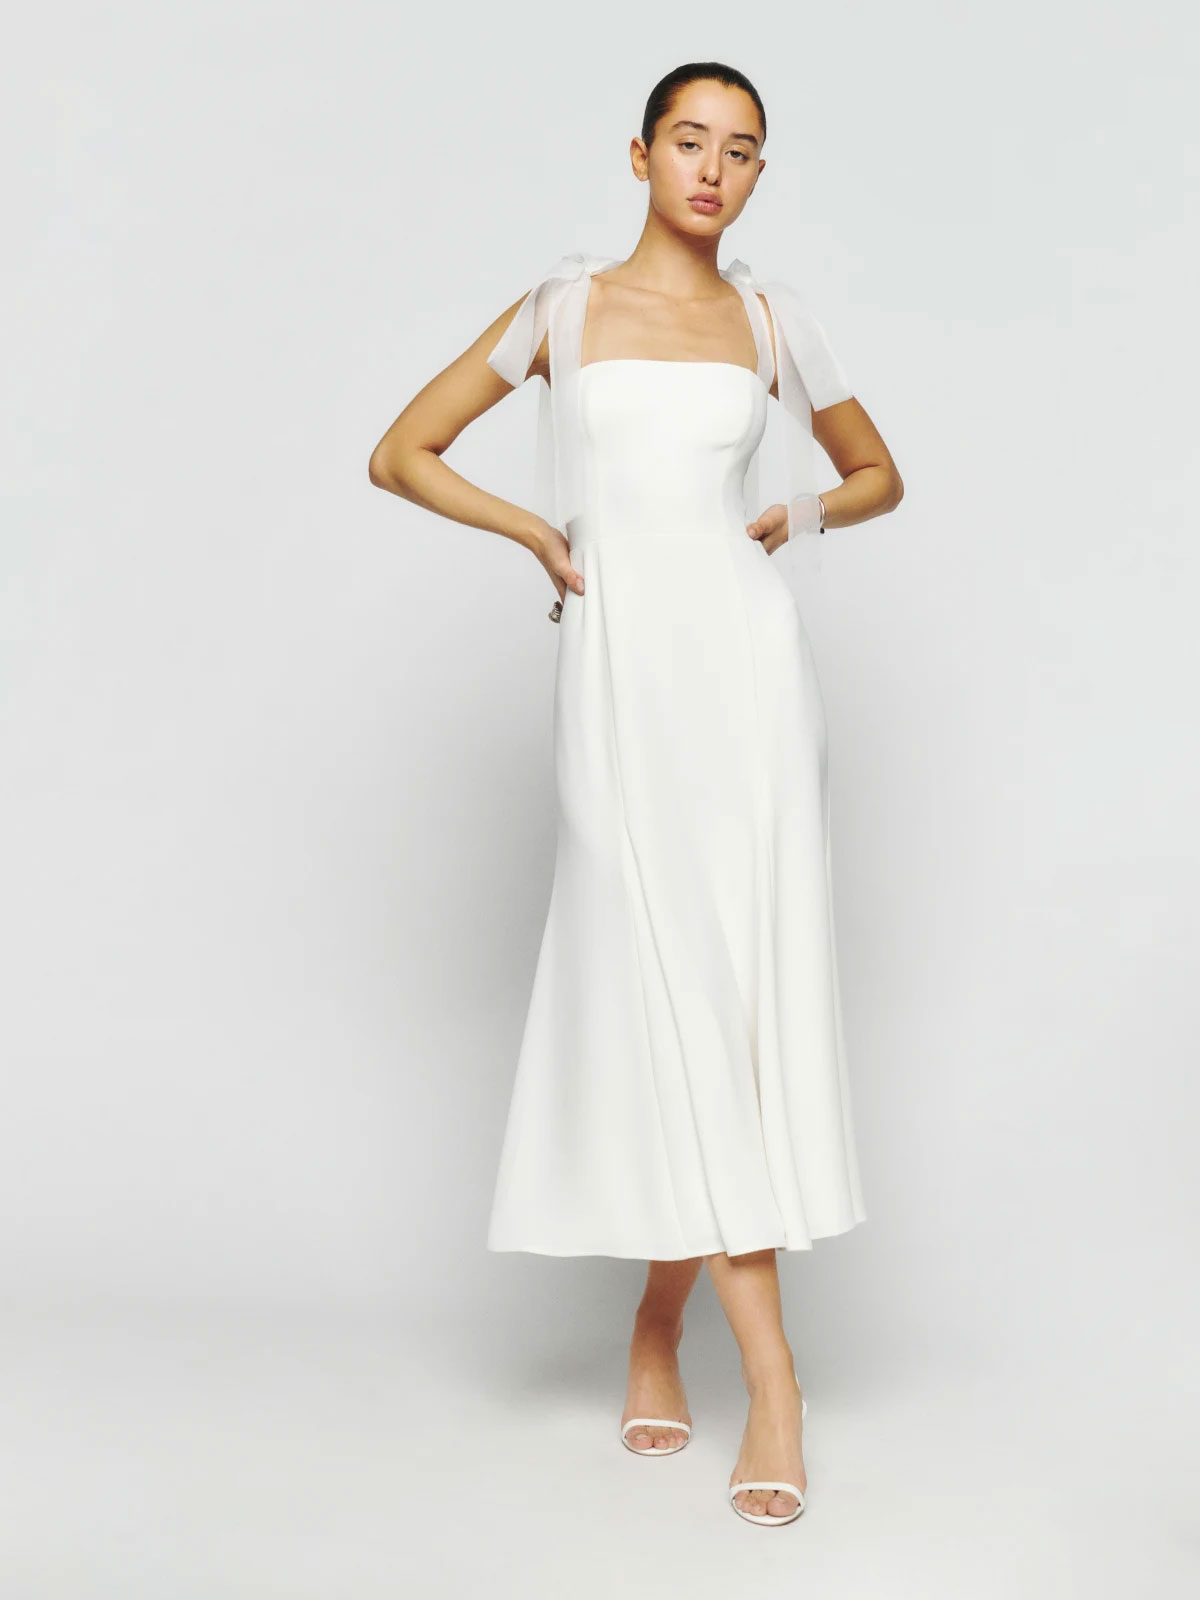 where to buy sustainable wedding dresses online